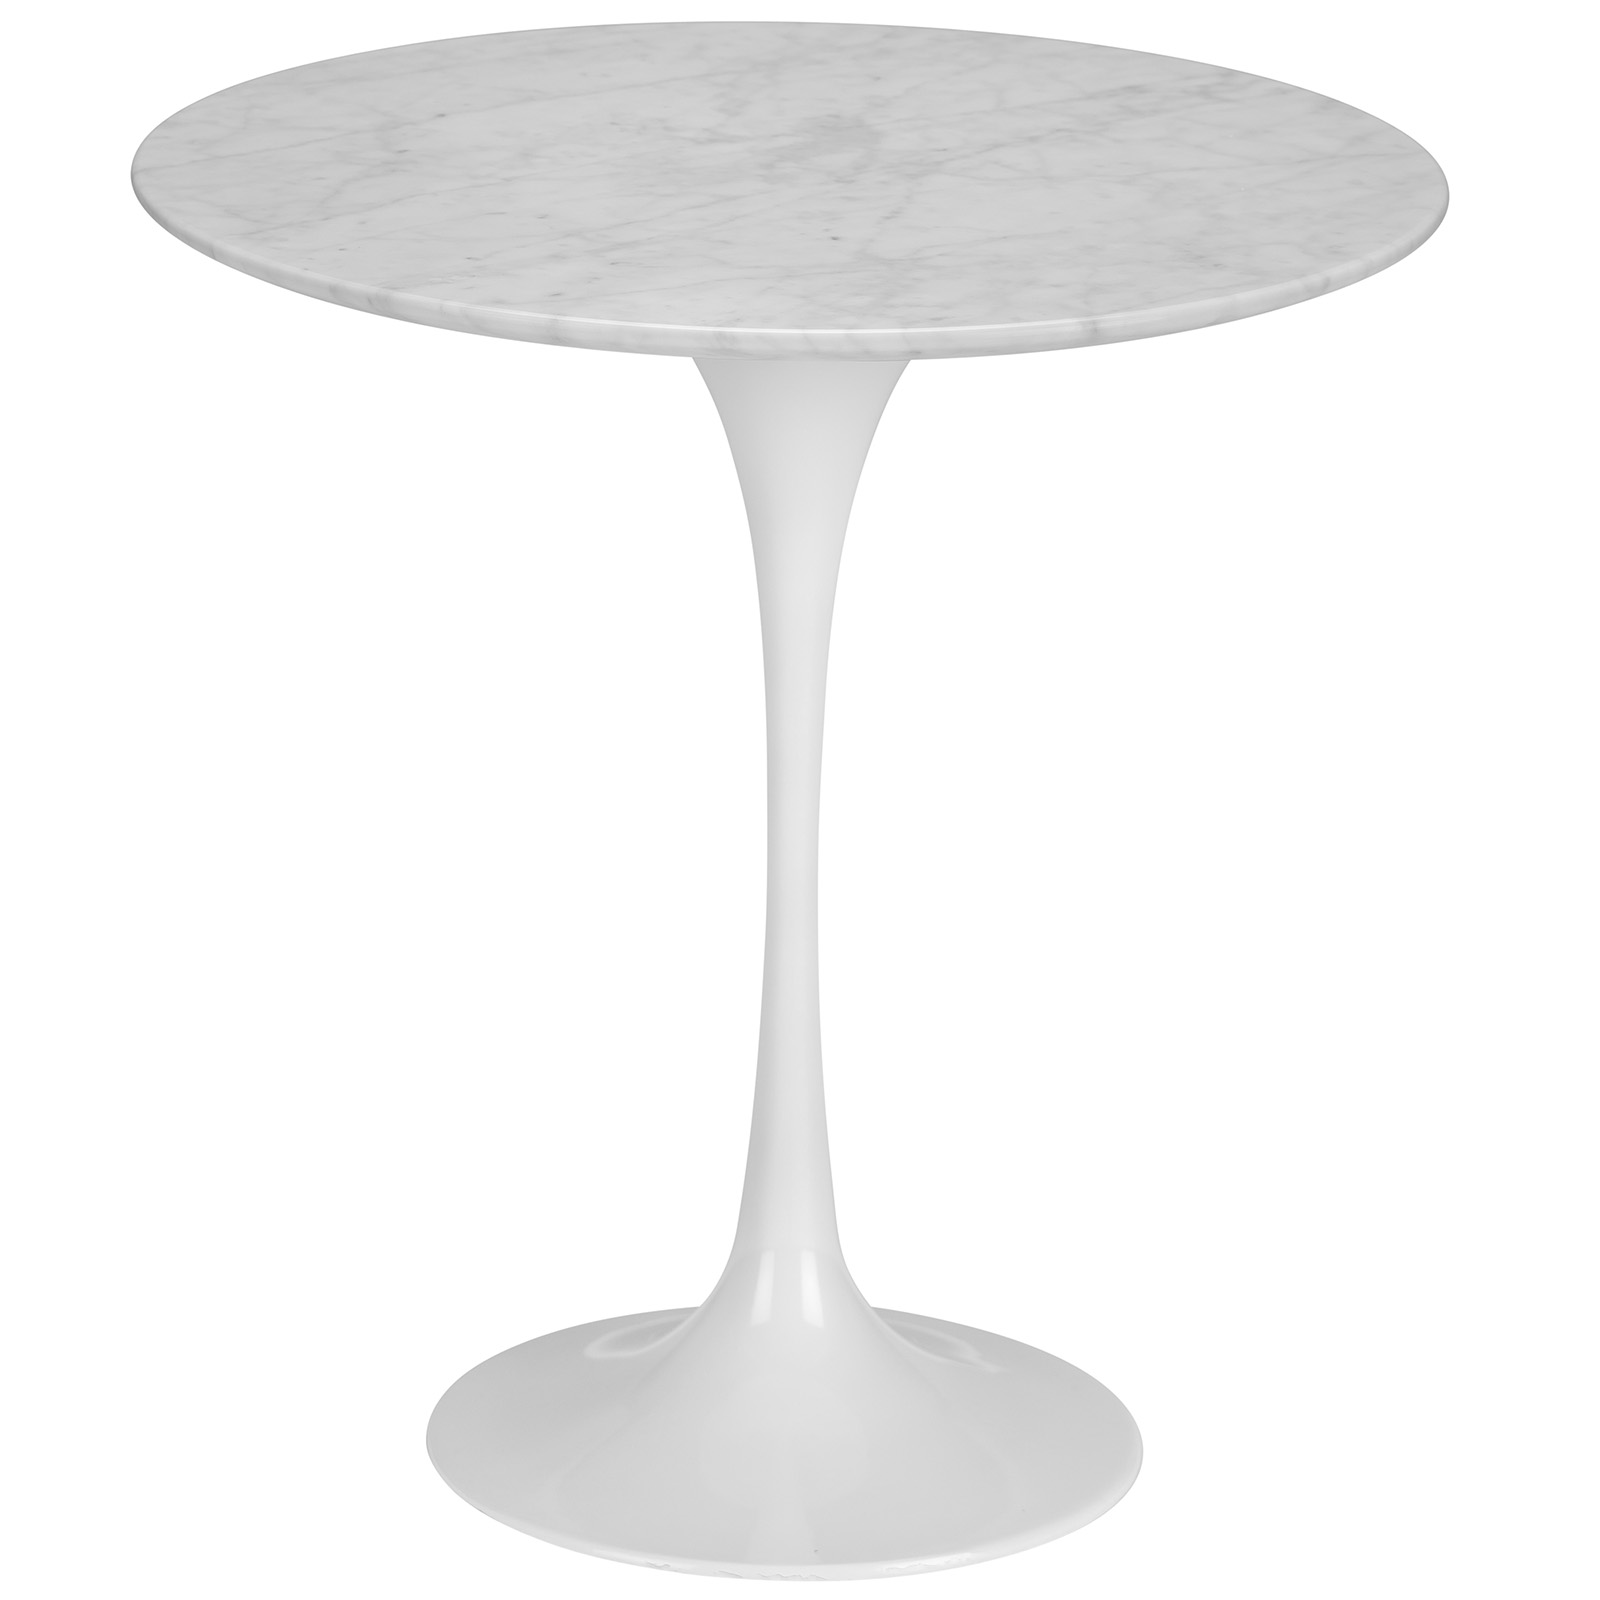 Poly & Bark Daisy 20" Marble Side Table in White Base - image 1 of 4